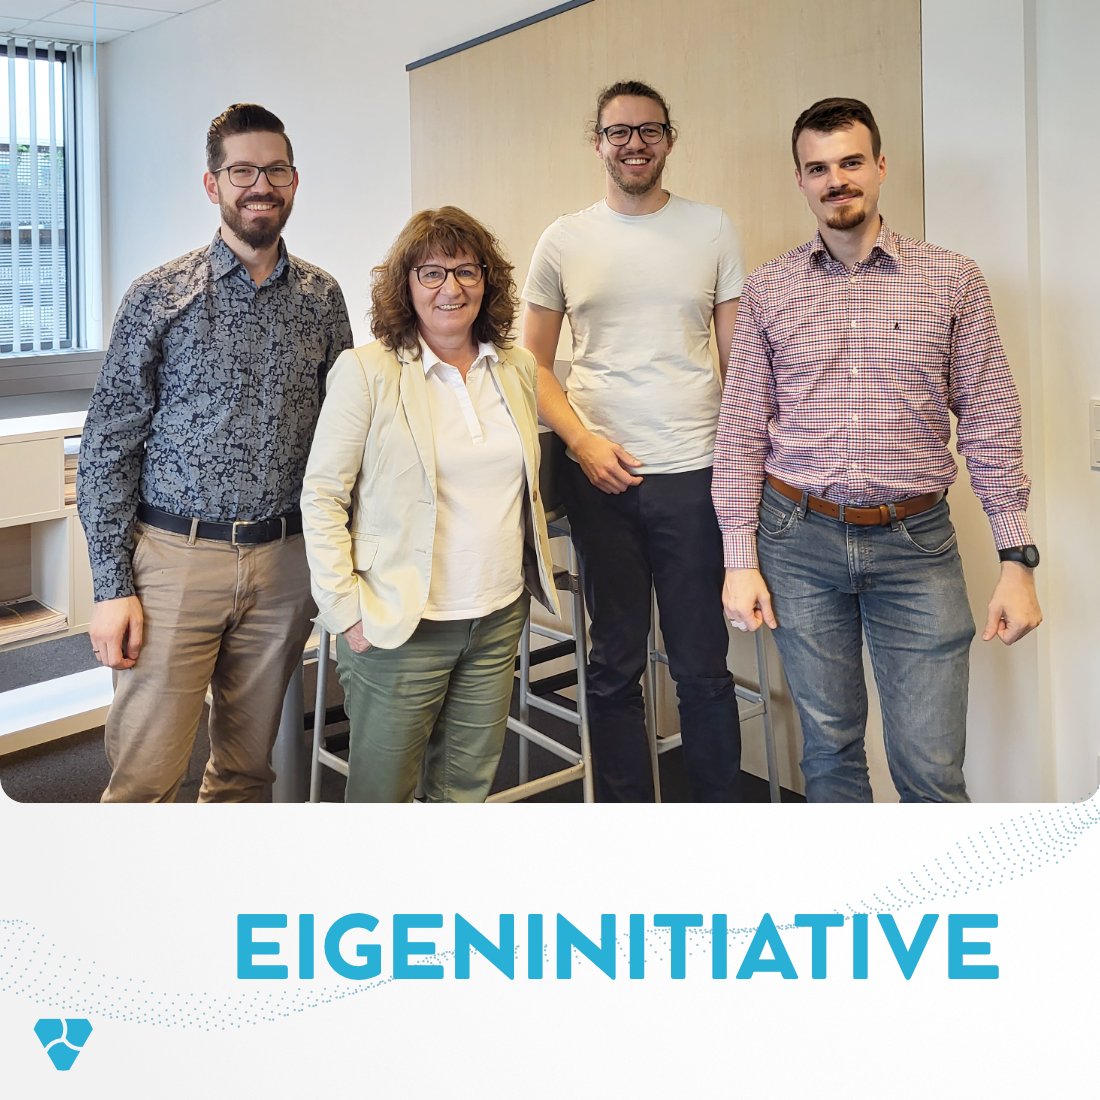 Initiative required: #Healthcare in transformation
One of the reasons why our three founders 5 years ago decided to engage for more digitalization in the healthcare system.
Many thanks for the visit to our German Member of Parliament Martina Stamm-Fibich in our offices yesterday